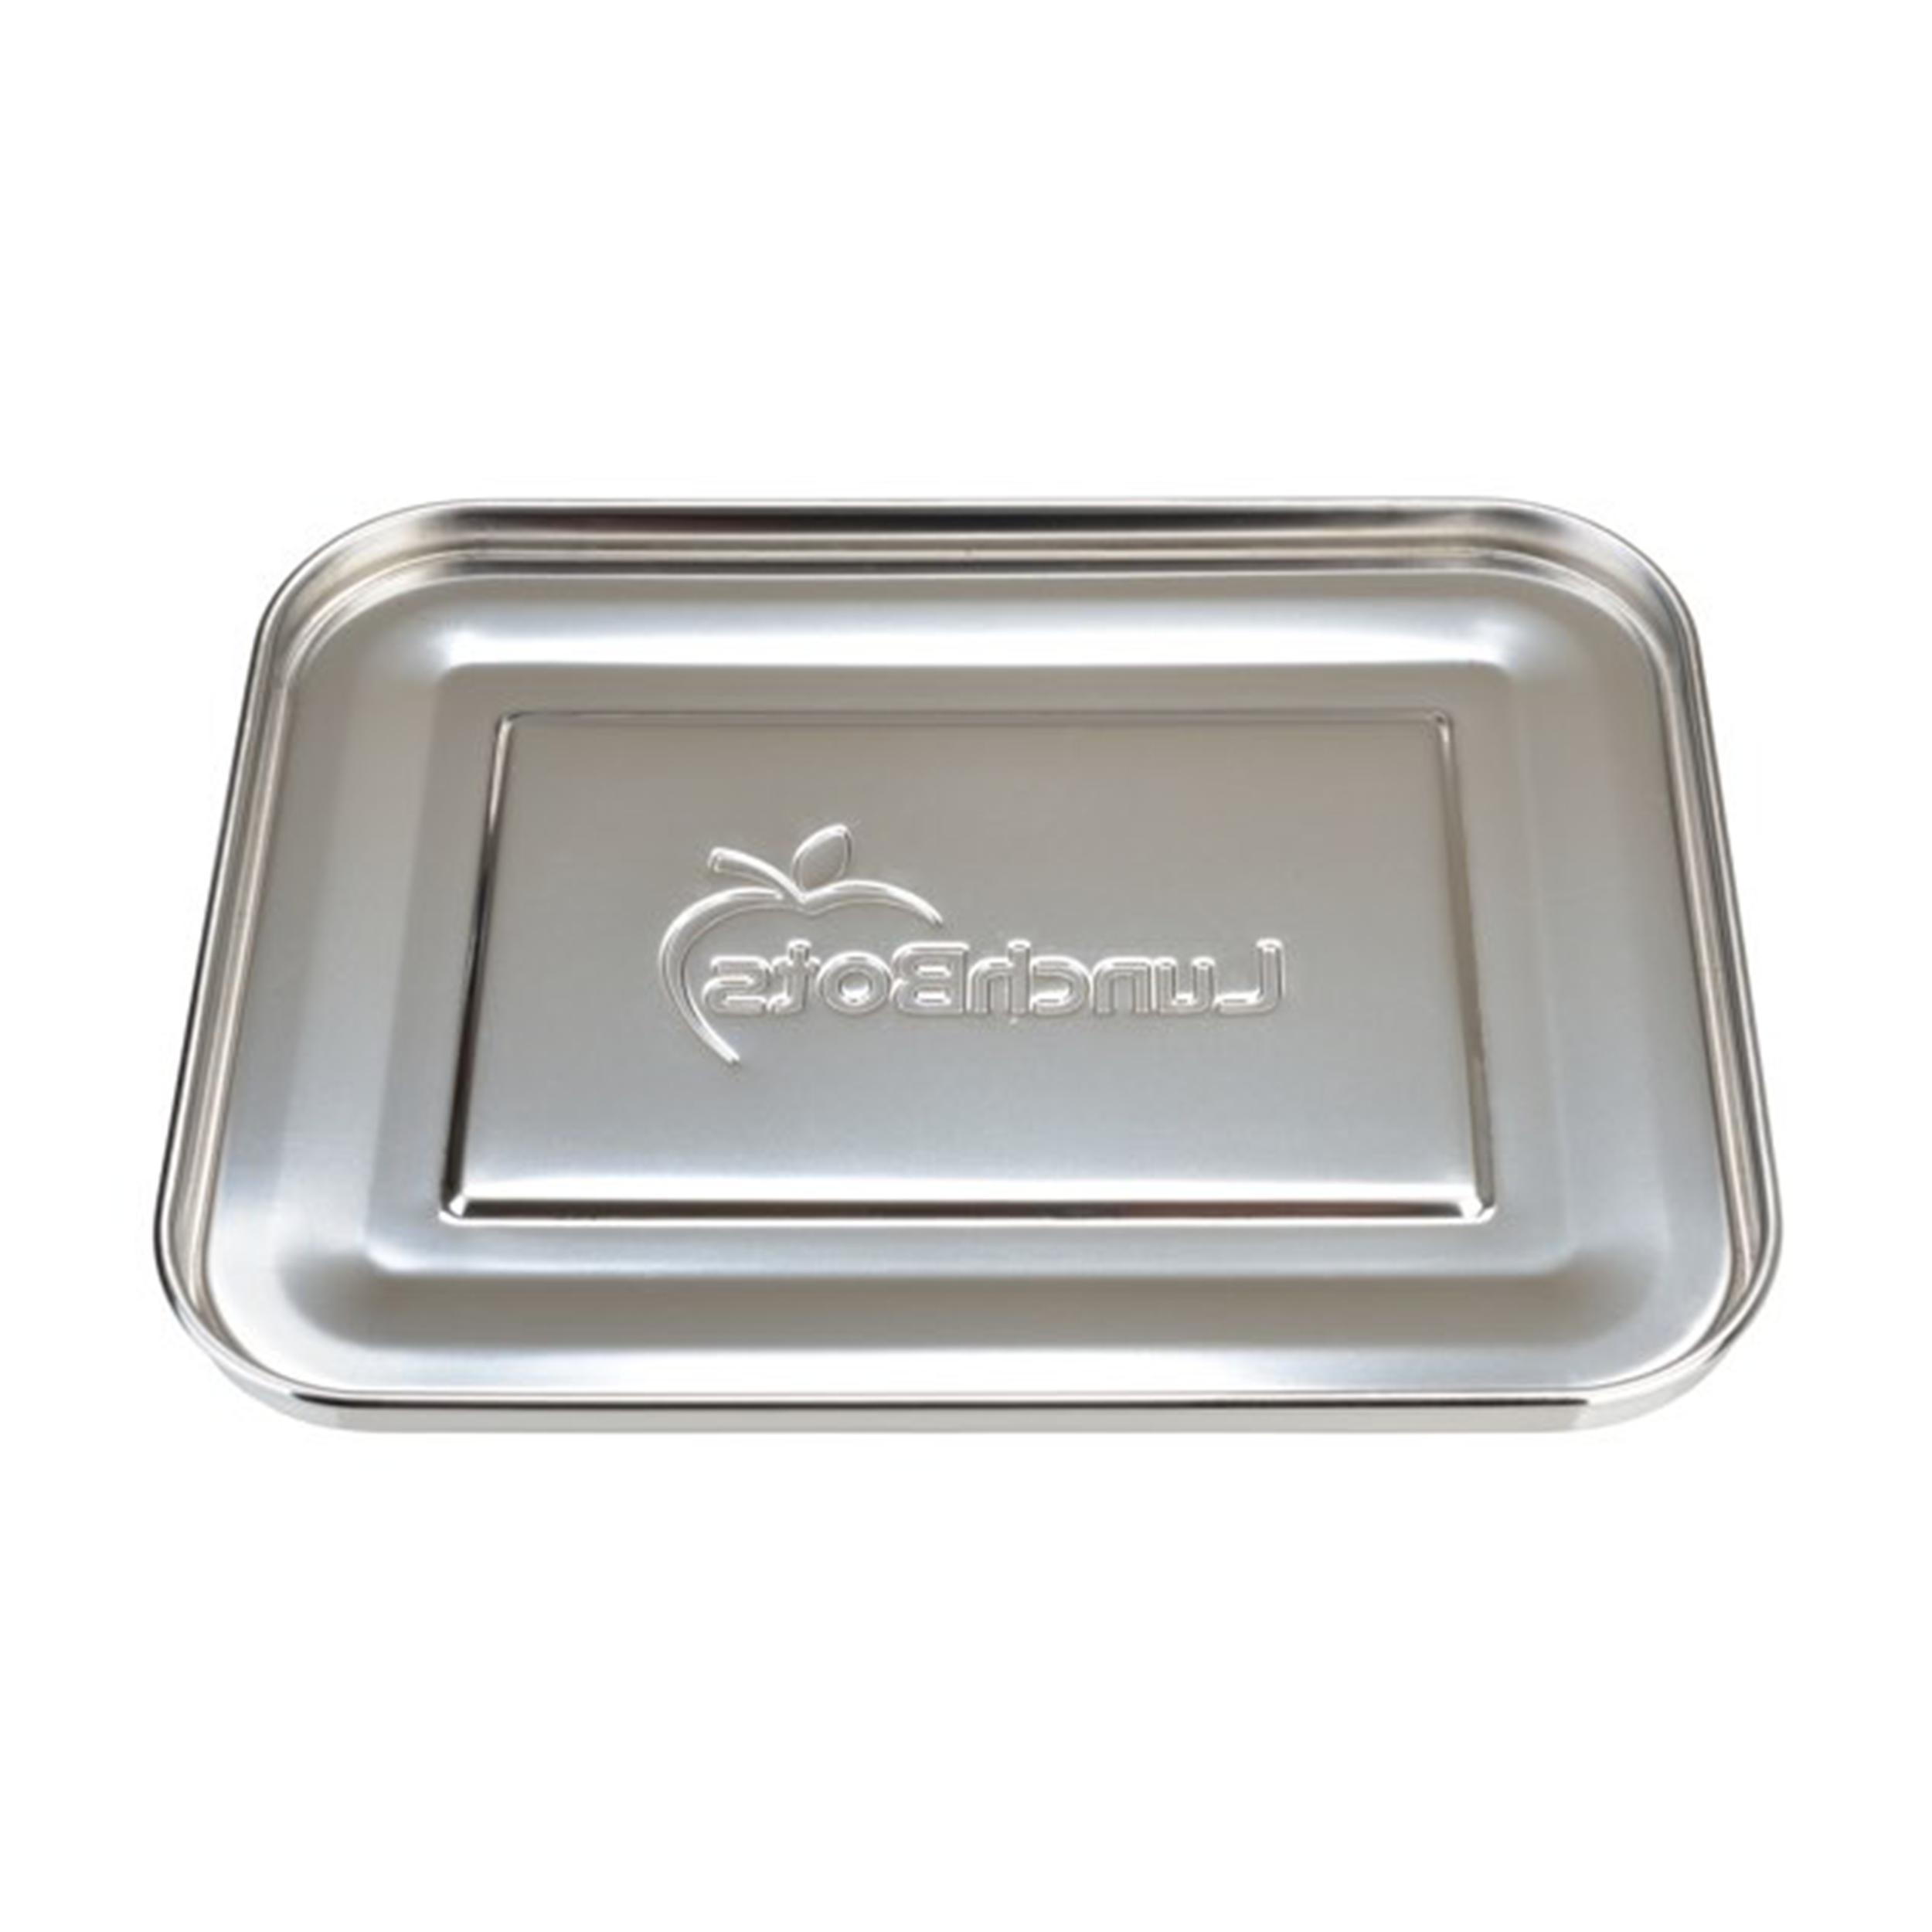 LunchBots Large Cinco Stainless Steel Lunch Container - Five